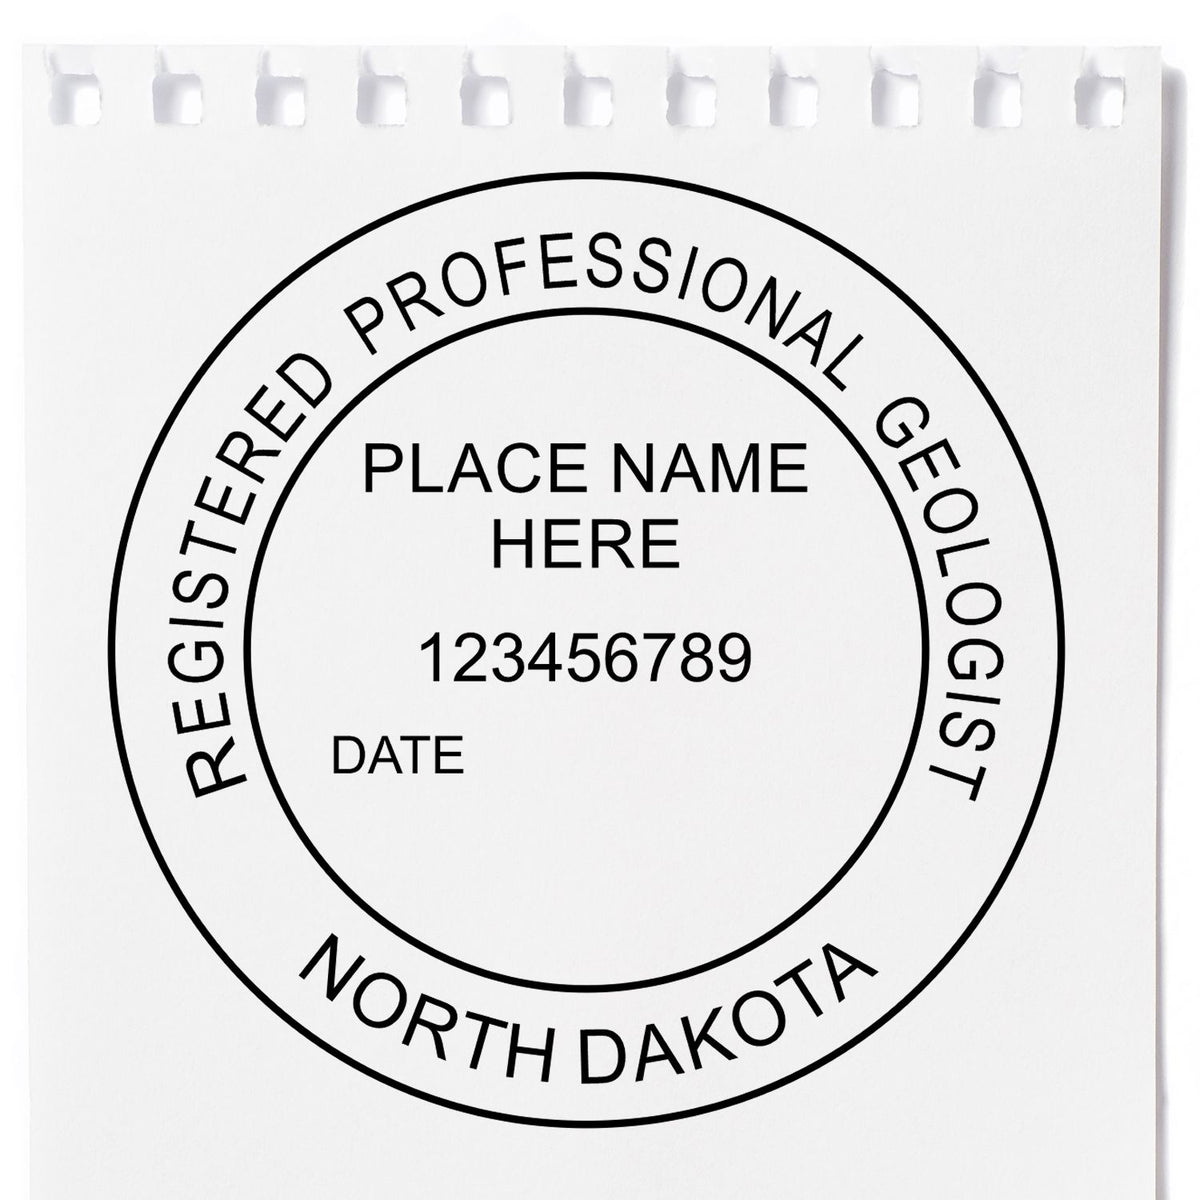 The North Dakota Professional Geologist Seal Stamp stamp impression comes to life with a crisp, detailed image stamped on paper - showcasing true professional quality.